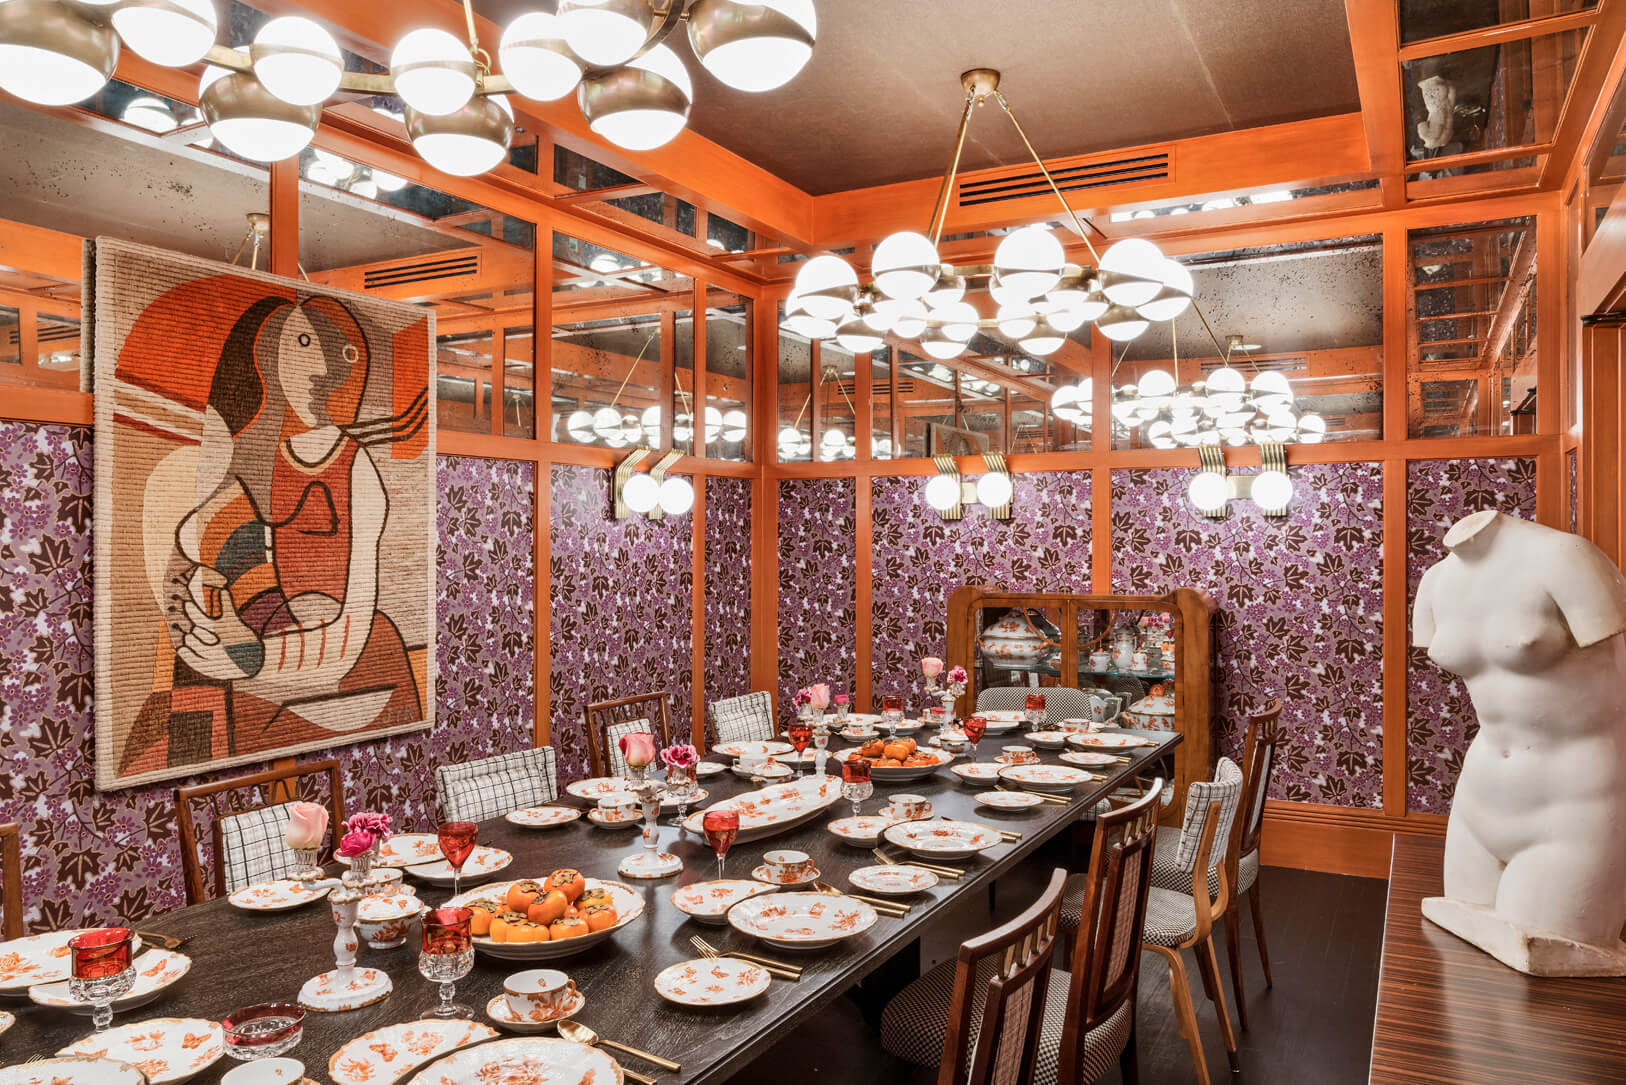 Gidla's Private Dining Room